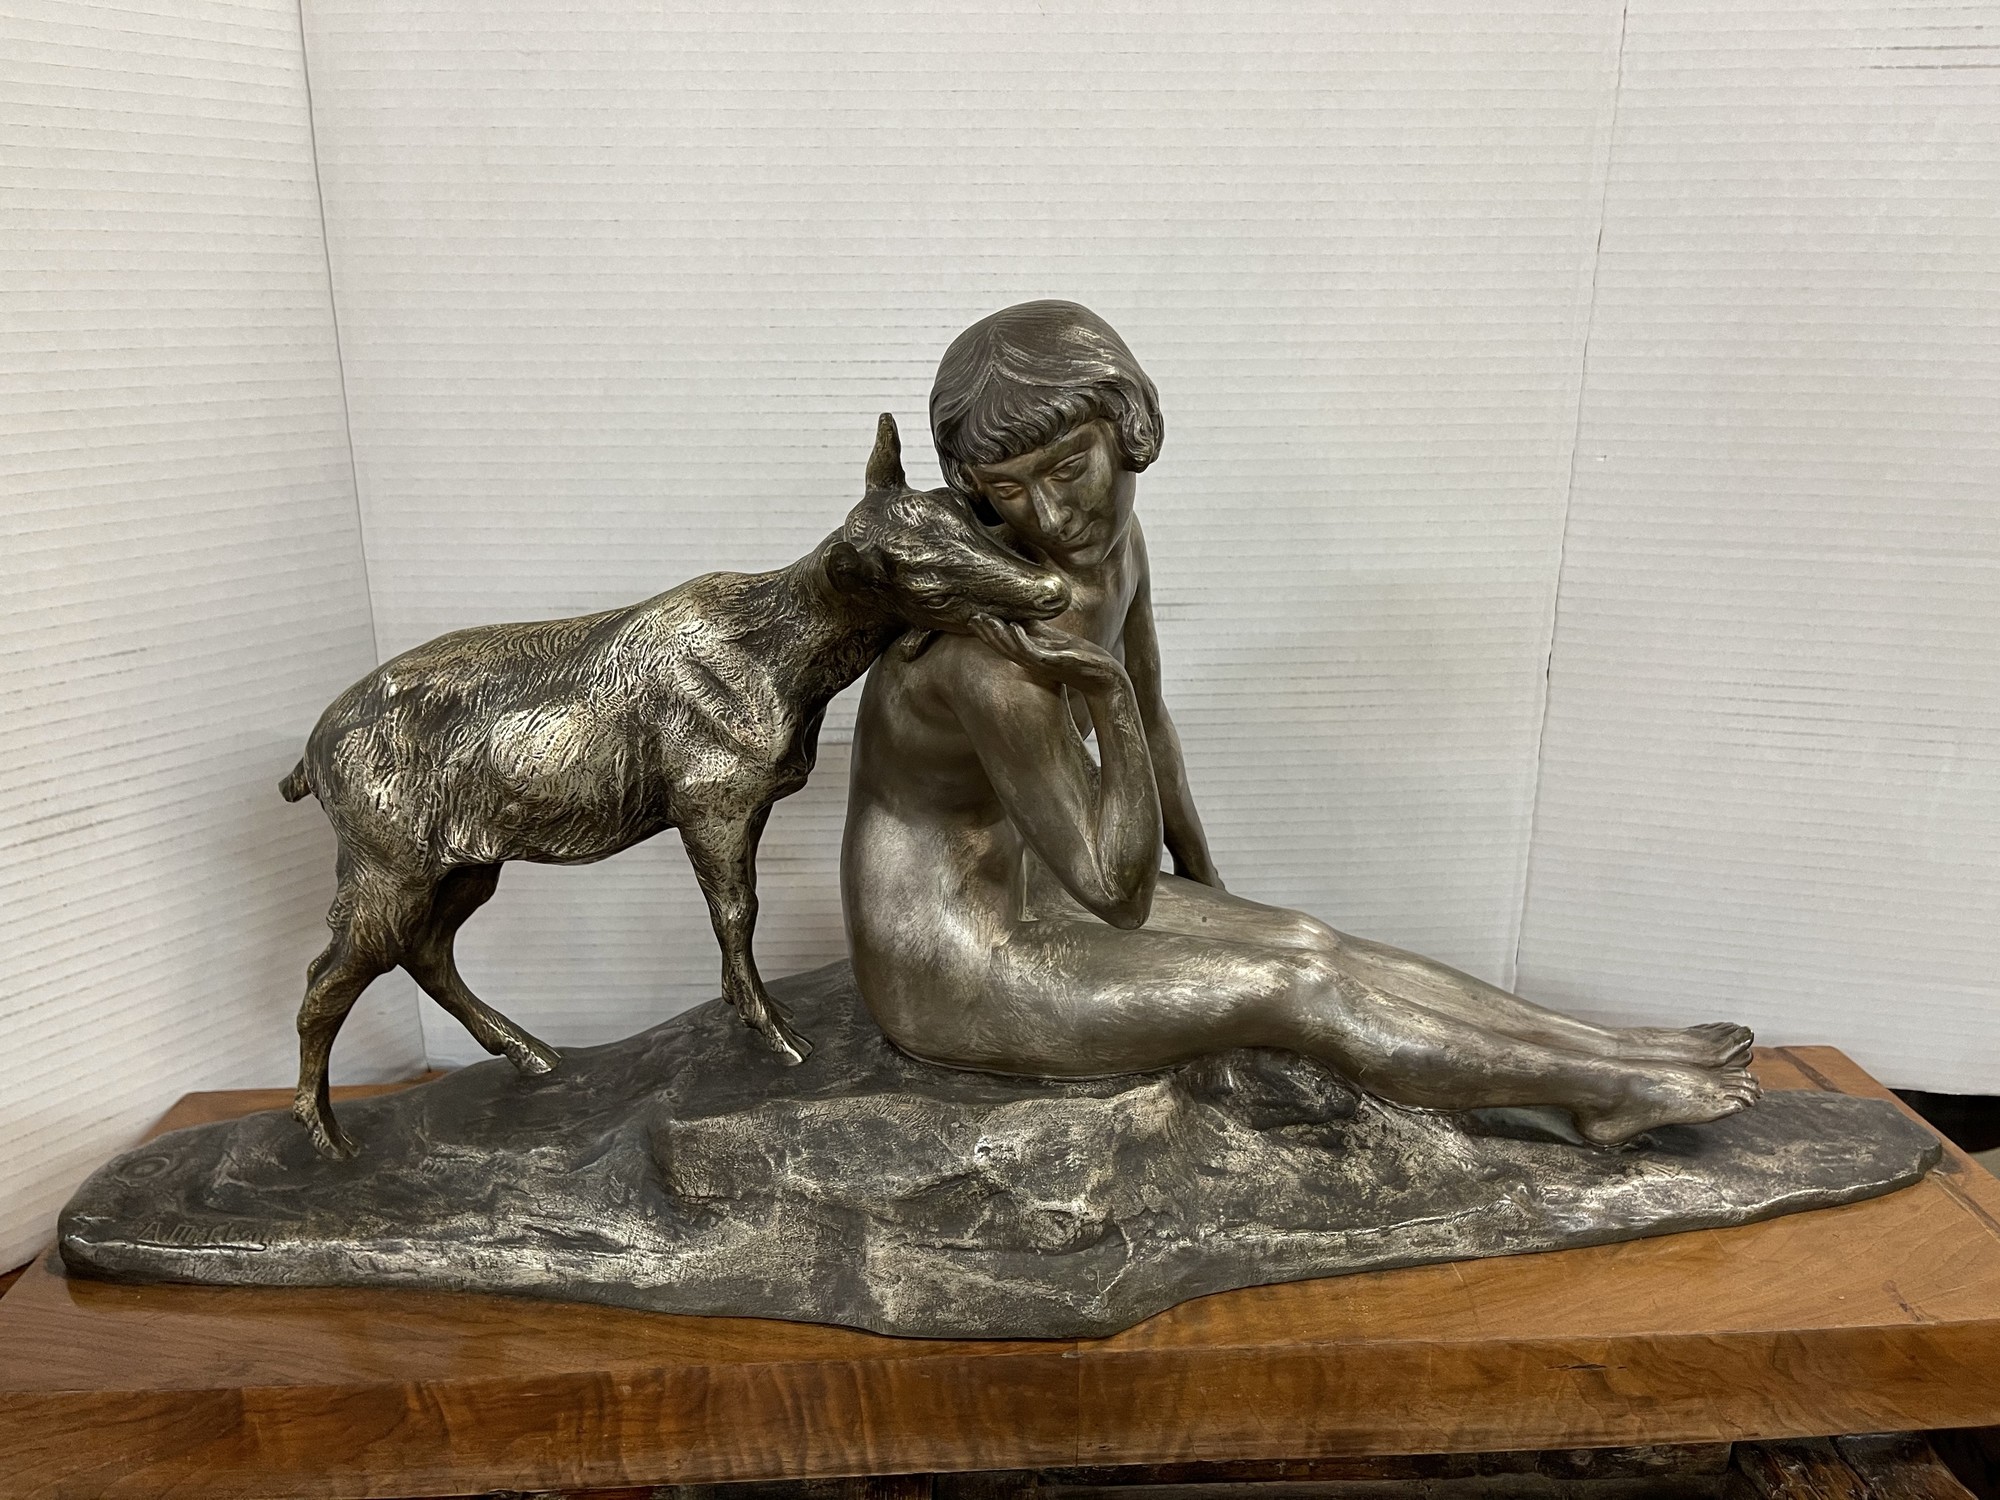 Bronze and wood Nymph with Deer. Situated on a wood base; the Nymph gently caresses the small Deer in hand. Stamped by artist Pierre-Alexandre Morlon (1879-1951) this 32w x 8d x 16h bronze  is offered in great condition!